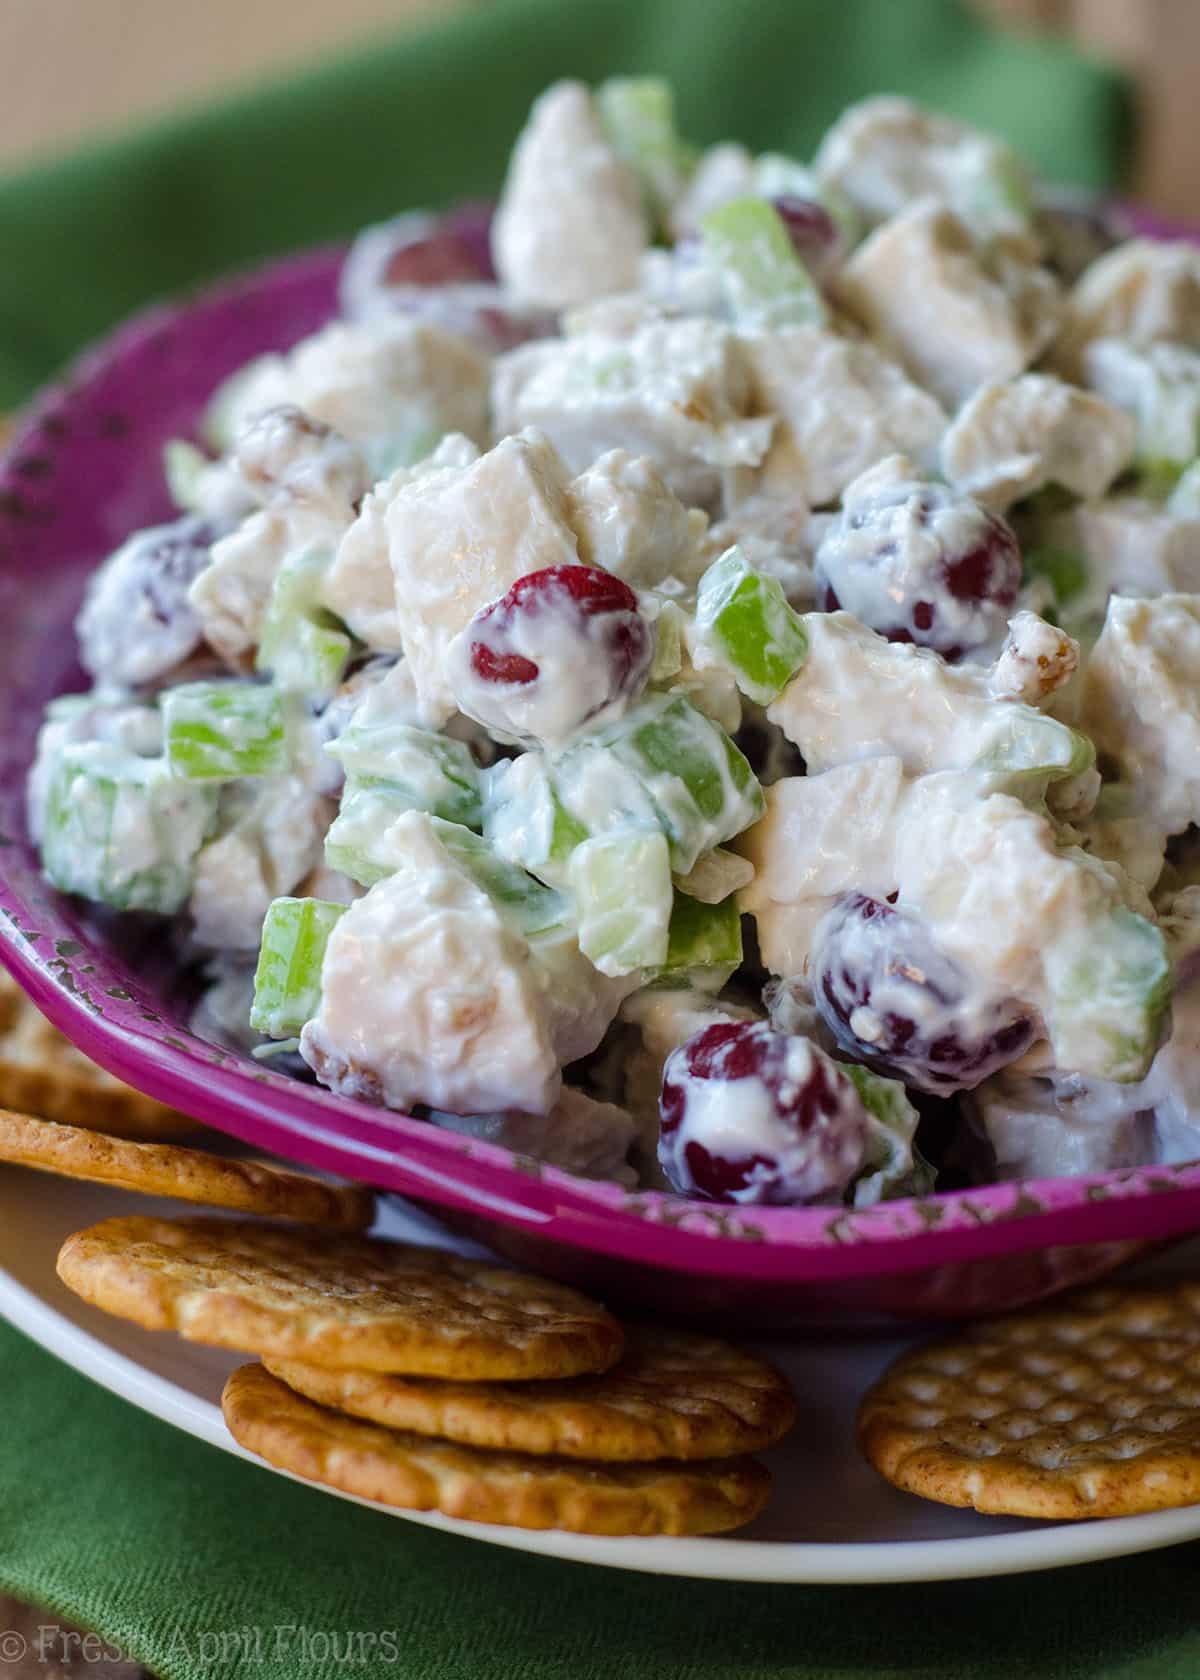 Skinny Chicken Salad: Traditionally calorie-laden chicken salad gets a healthy upgrade using Greek yogurt and spices. Celery, grapes, and walnuts add the perfect crunch and flavors to insure you won't miss the "real" thing!